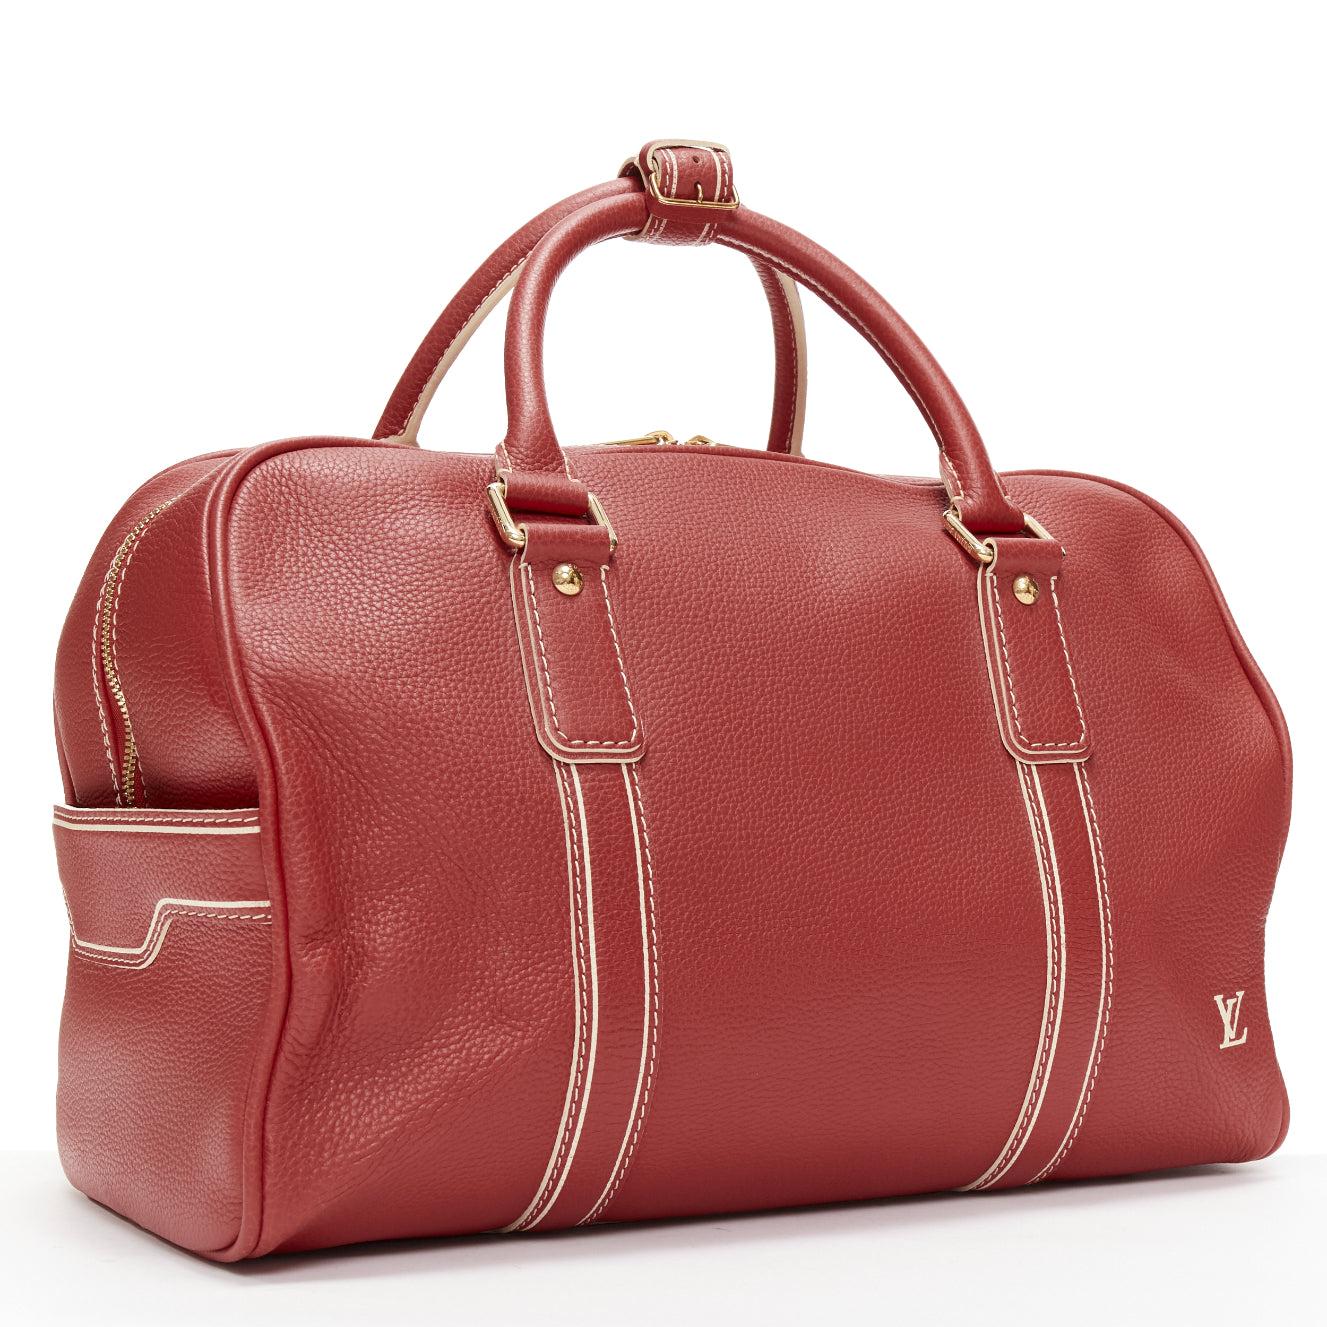 LOUIS VUITTON Red Tobaco Leather Carryall Boston Duffle top handle travel bag In Good Condition For Sale In Hong Kong, NT